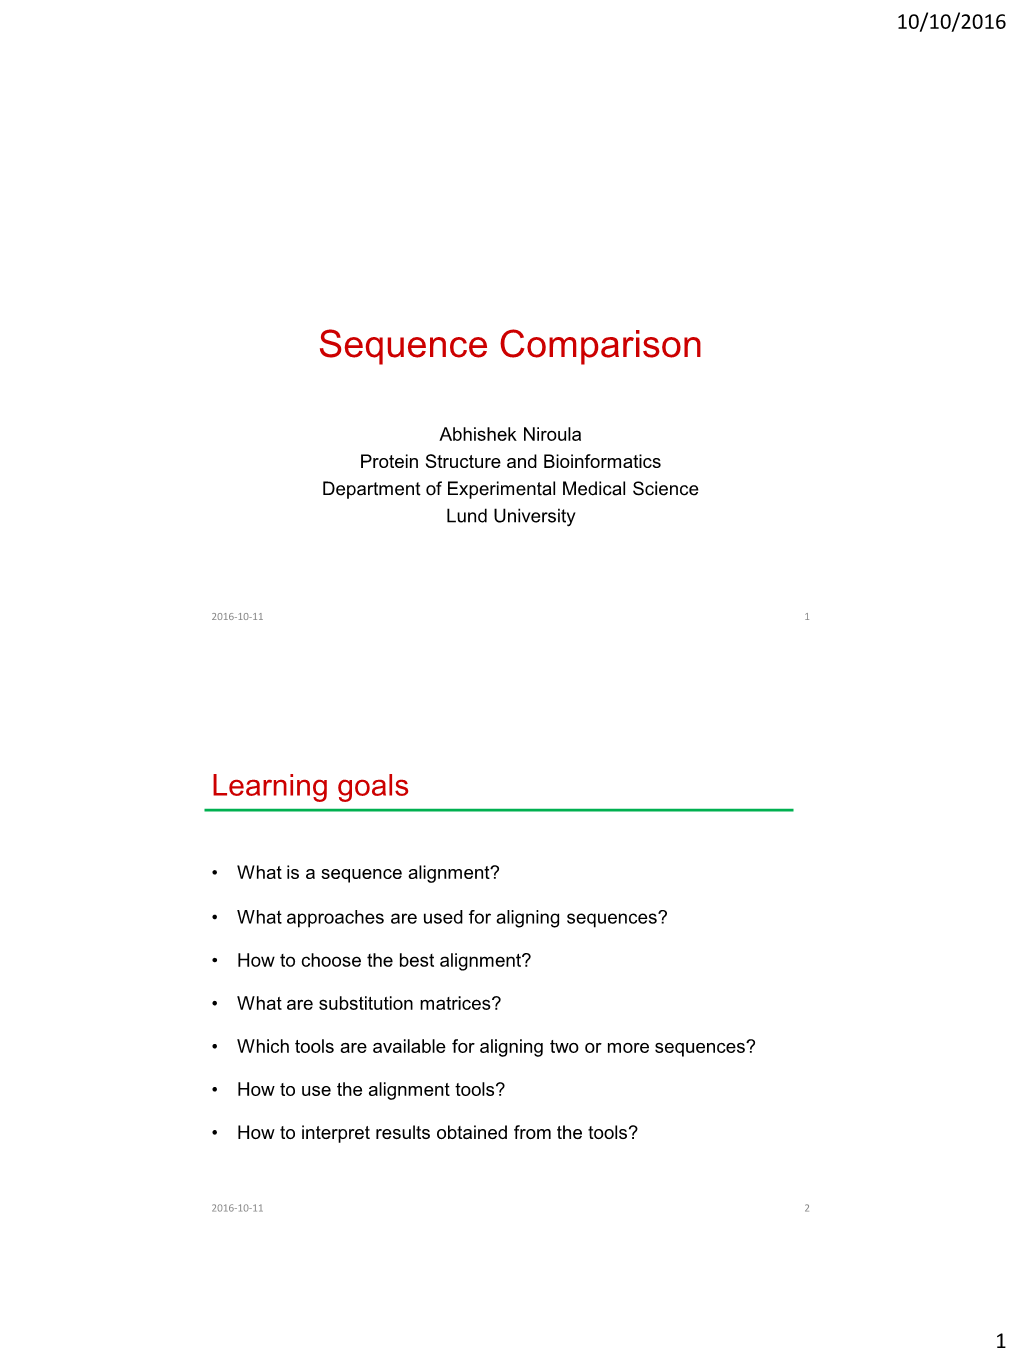 Sequence Alignment and Comparison